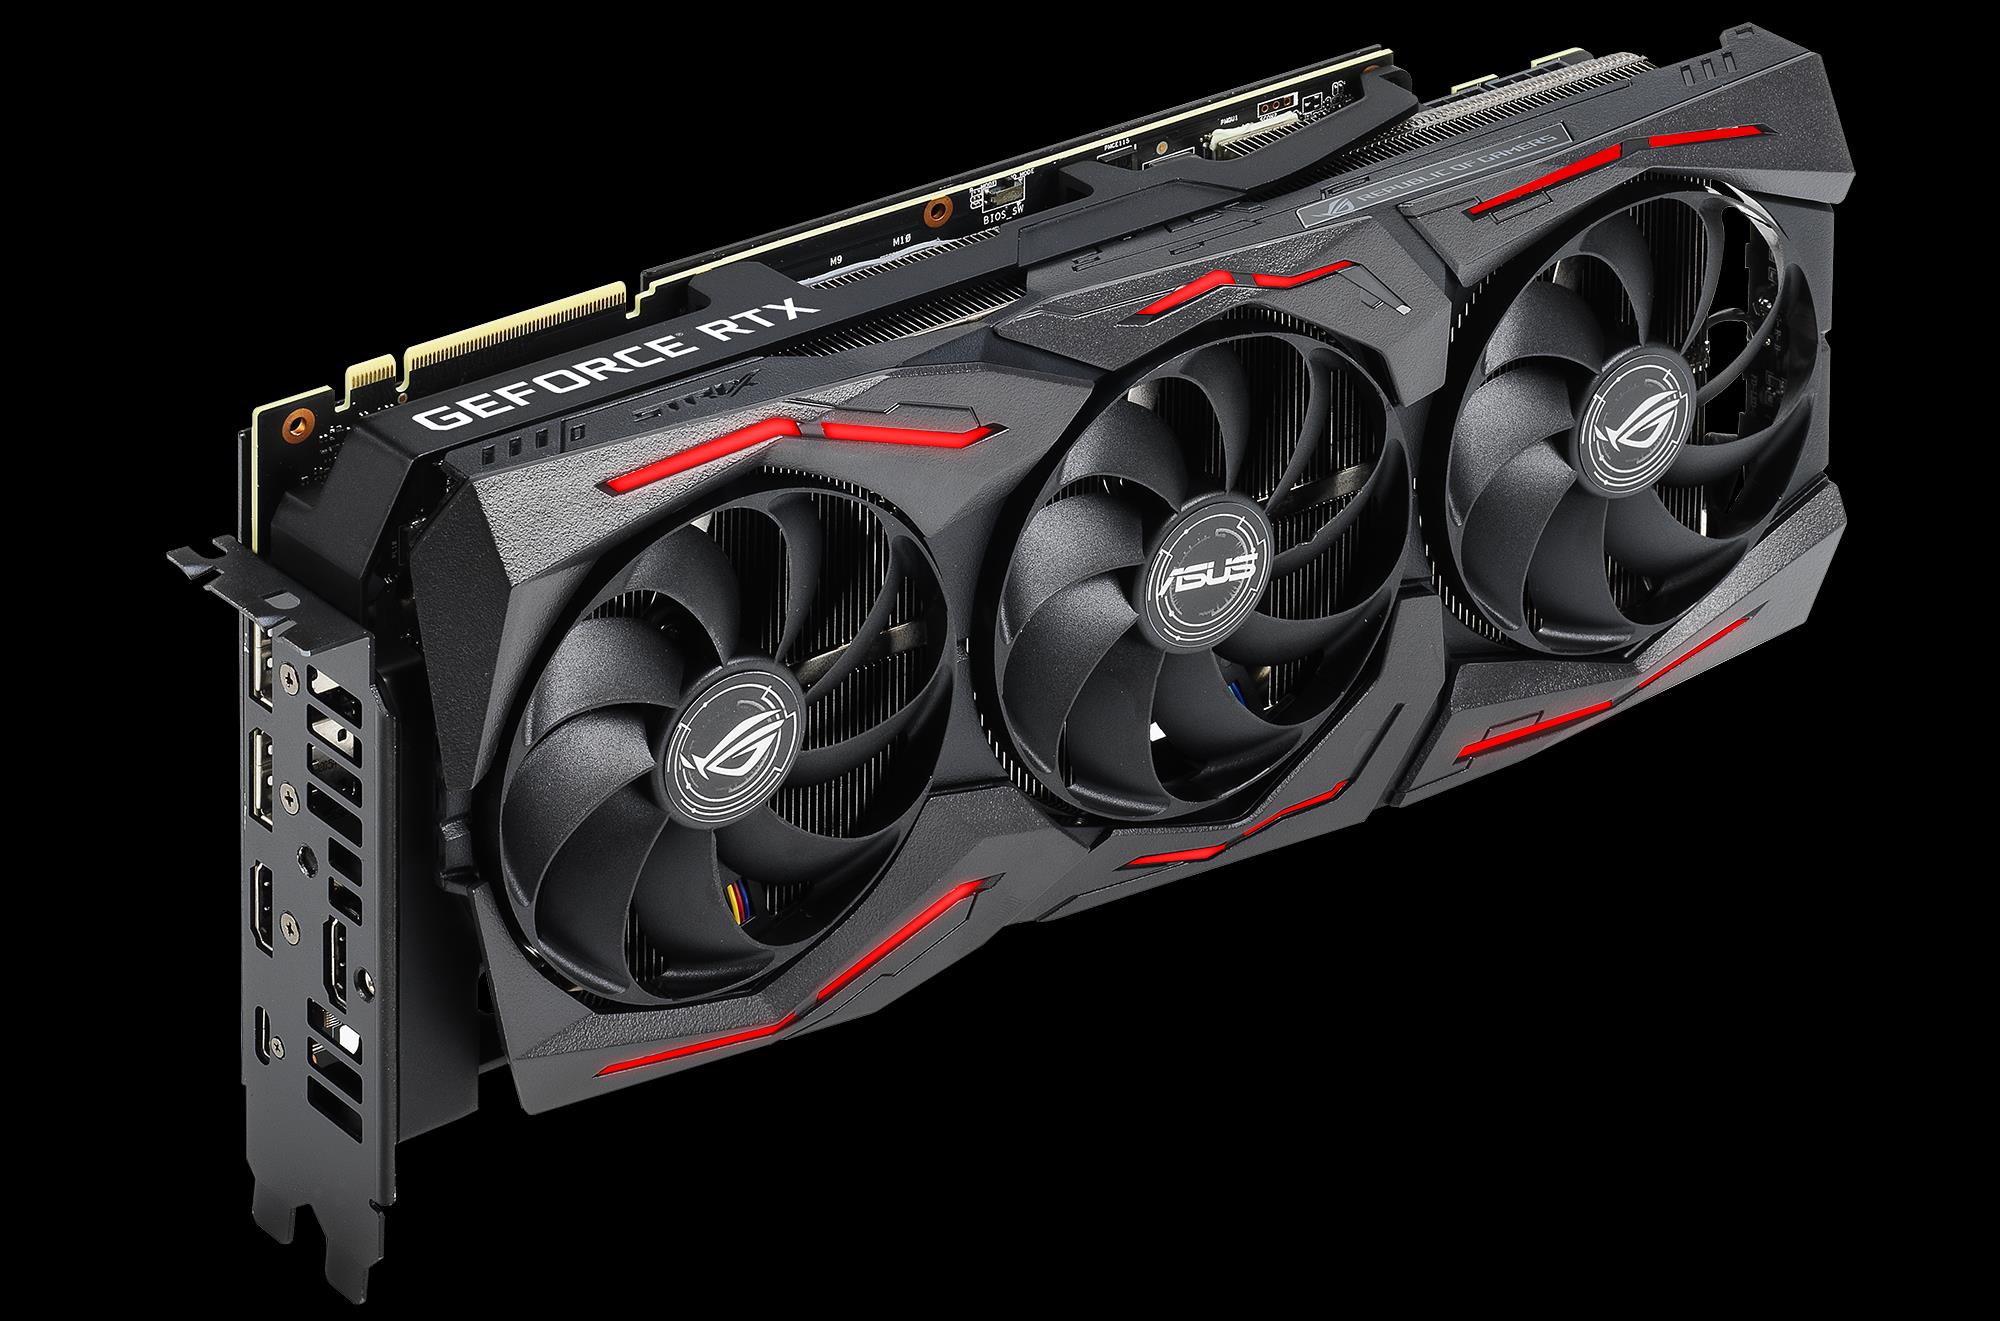 Supercharge your game with ASUS GeForce RTX SUPER graphics cards